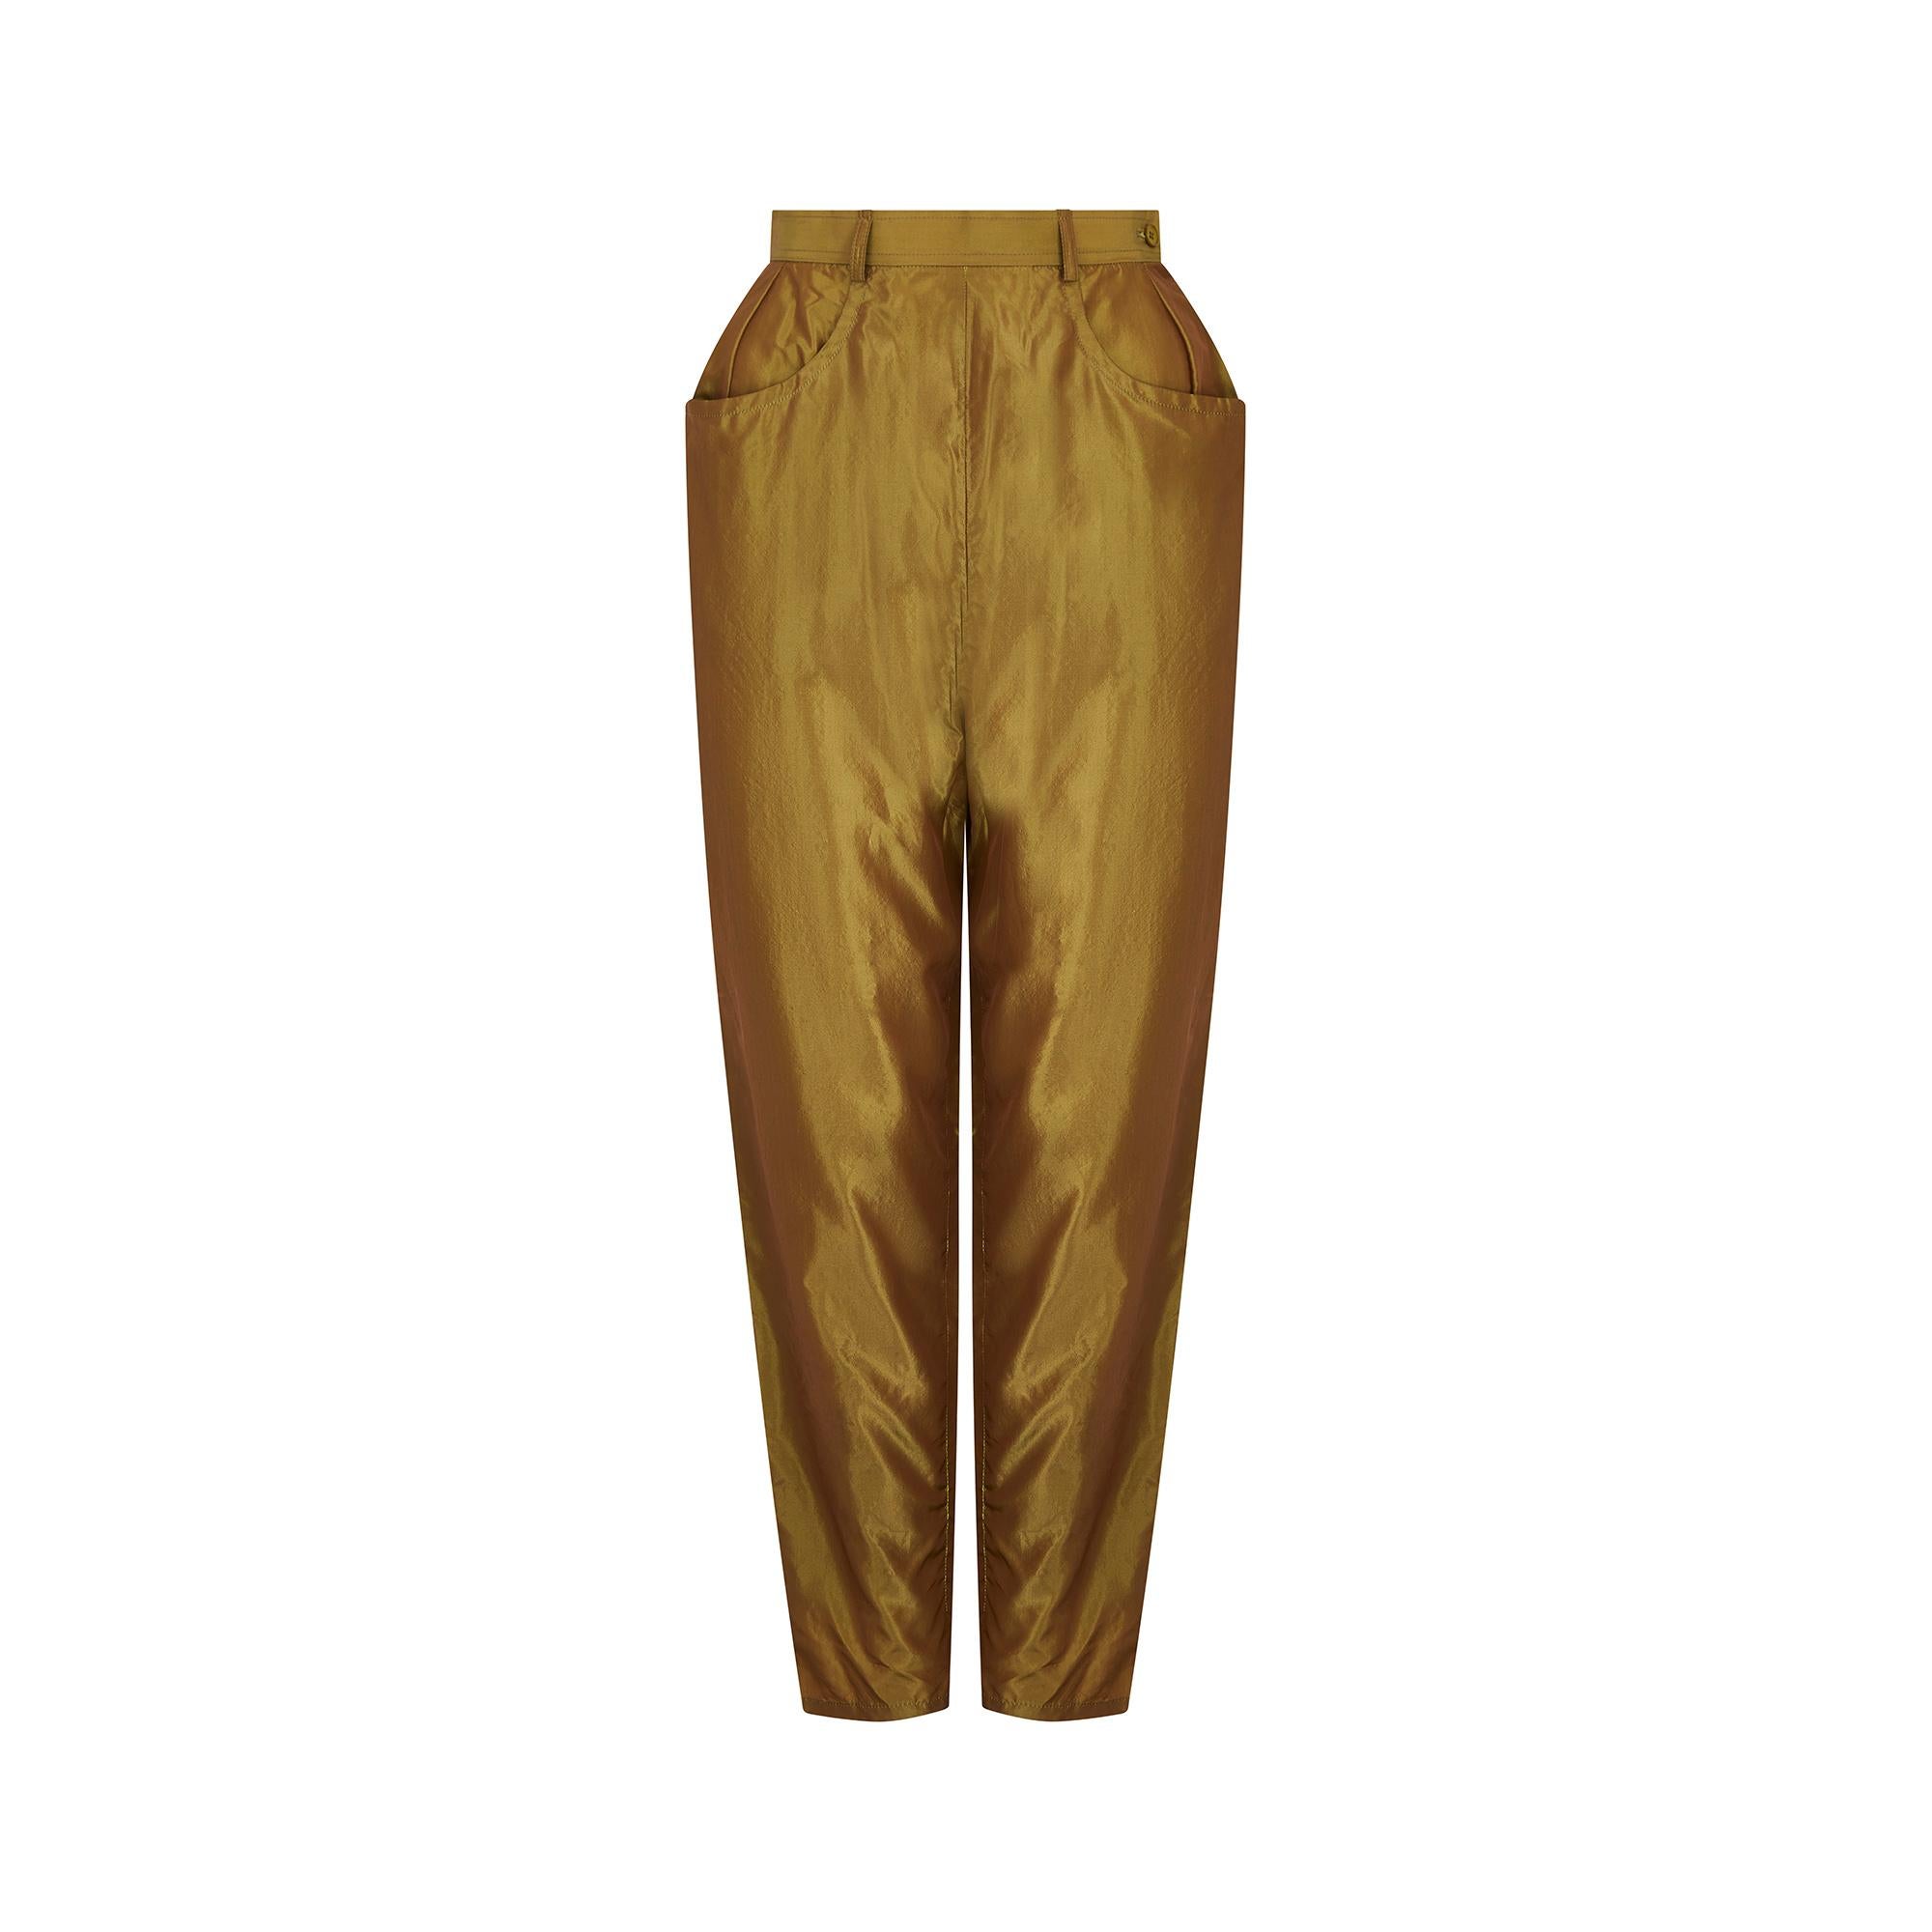 1990s iridescent peg trousers by Yves Saint Laurent from his Rive Gauche line, featuring a fitted high waist and a side zip with top button closure. The fabric is a soft 100% silk, with an iridescent shine that fluctuates between khaki, olive and